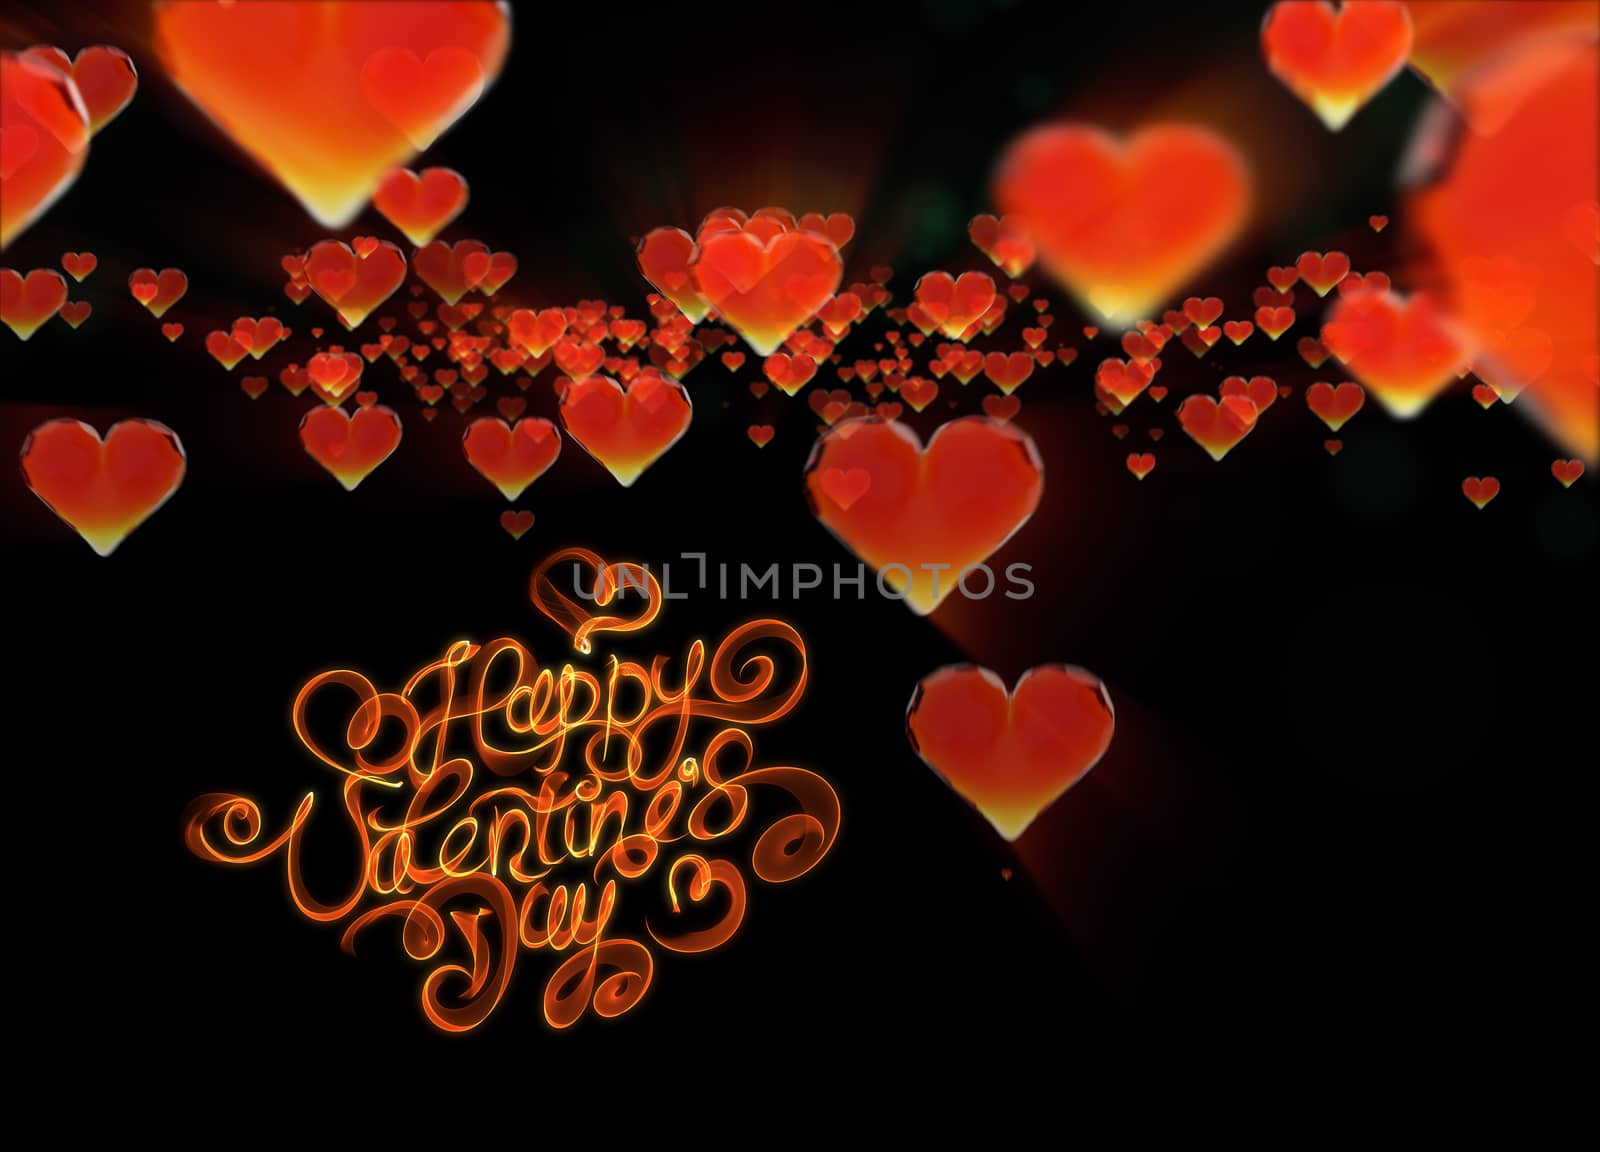 Happy valentines day lettering written by fire of smoke over black background by skrotov